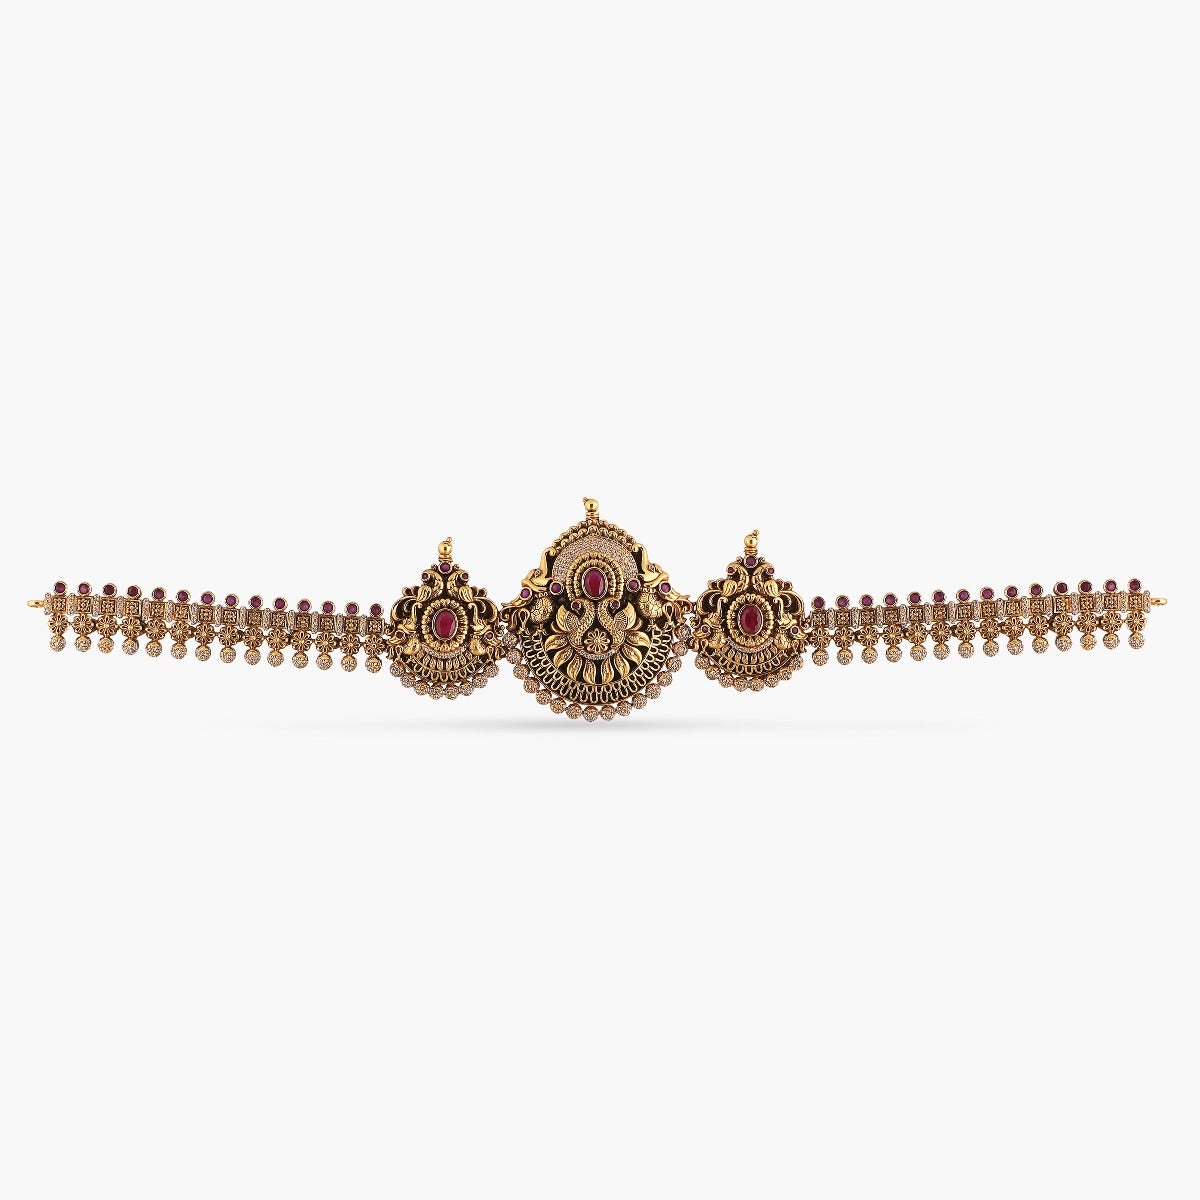 Explore Indian Traditional Antique Waistbands